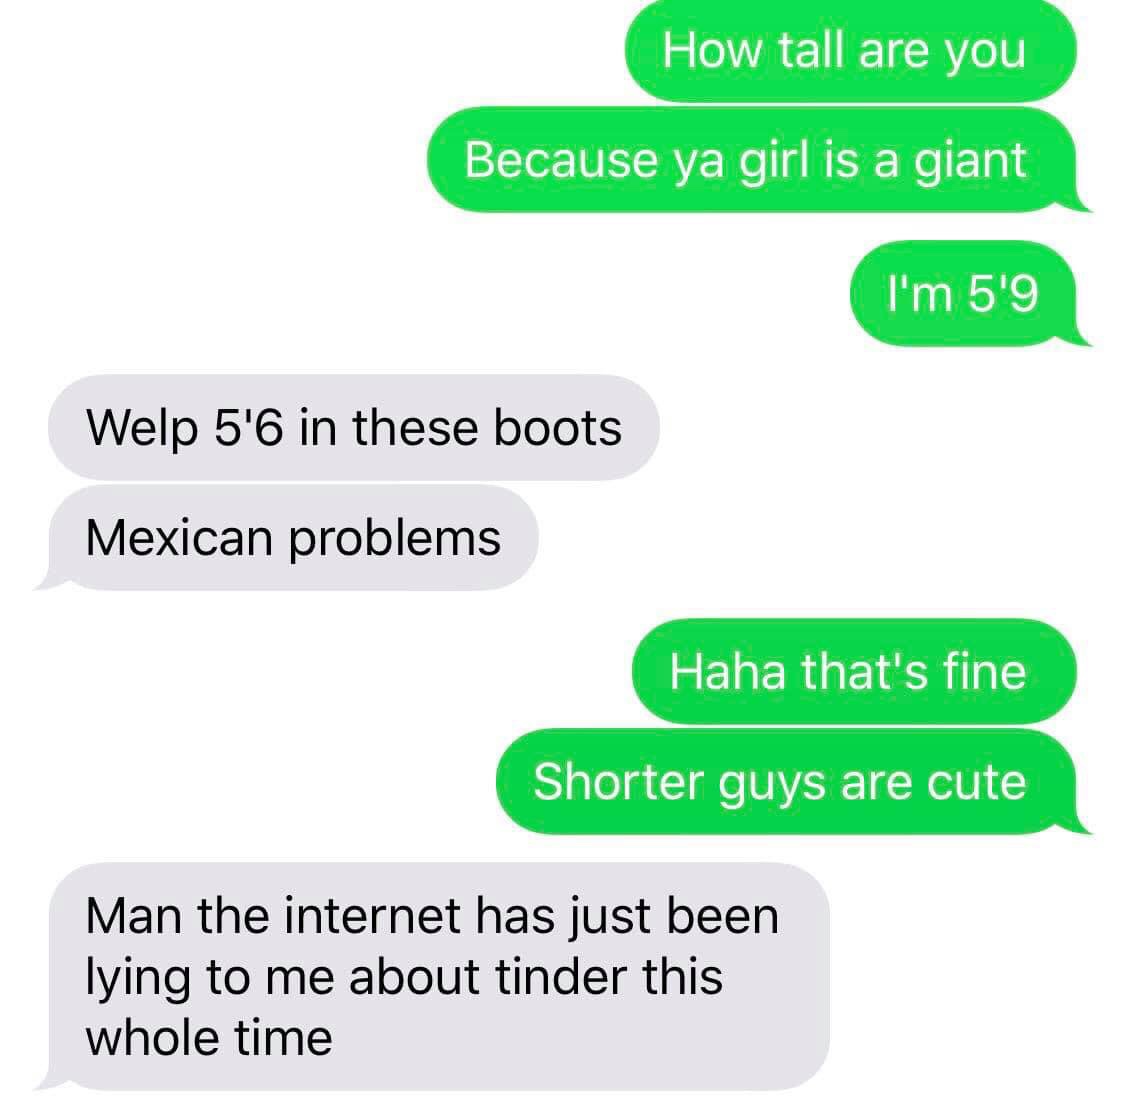 tinder - funny ways to shoot your shot - How tall are you Because ya girl is a giant I'm 5'9 Welp 5'6 in these boots Mexican problems Haha that's fine Shorter guys are cute Man the internet has just been lying to me about tinder this whole time